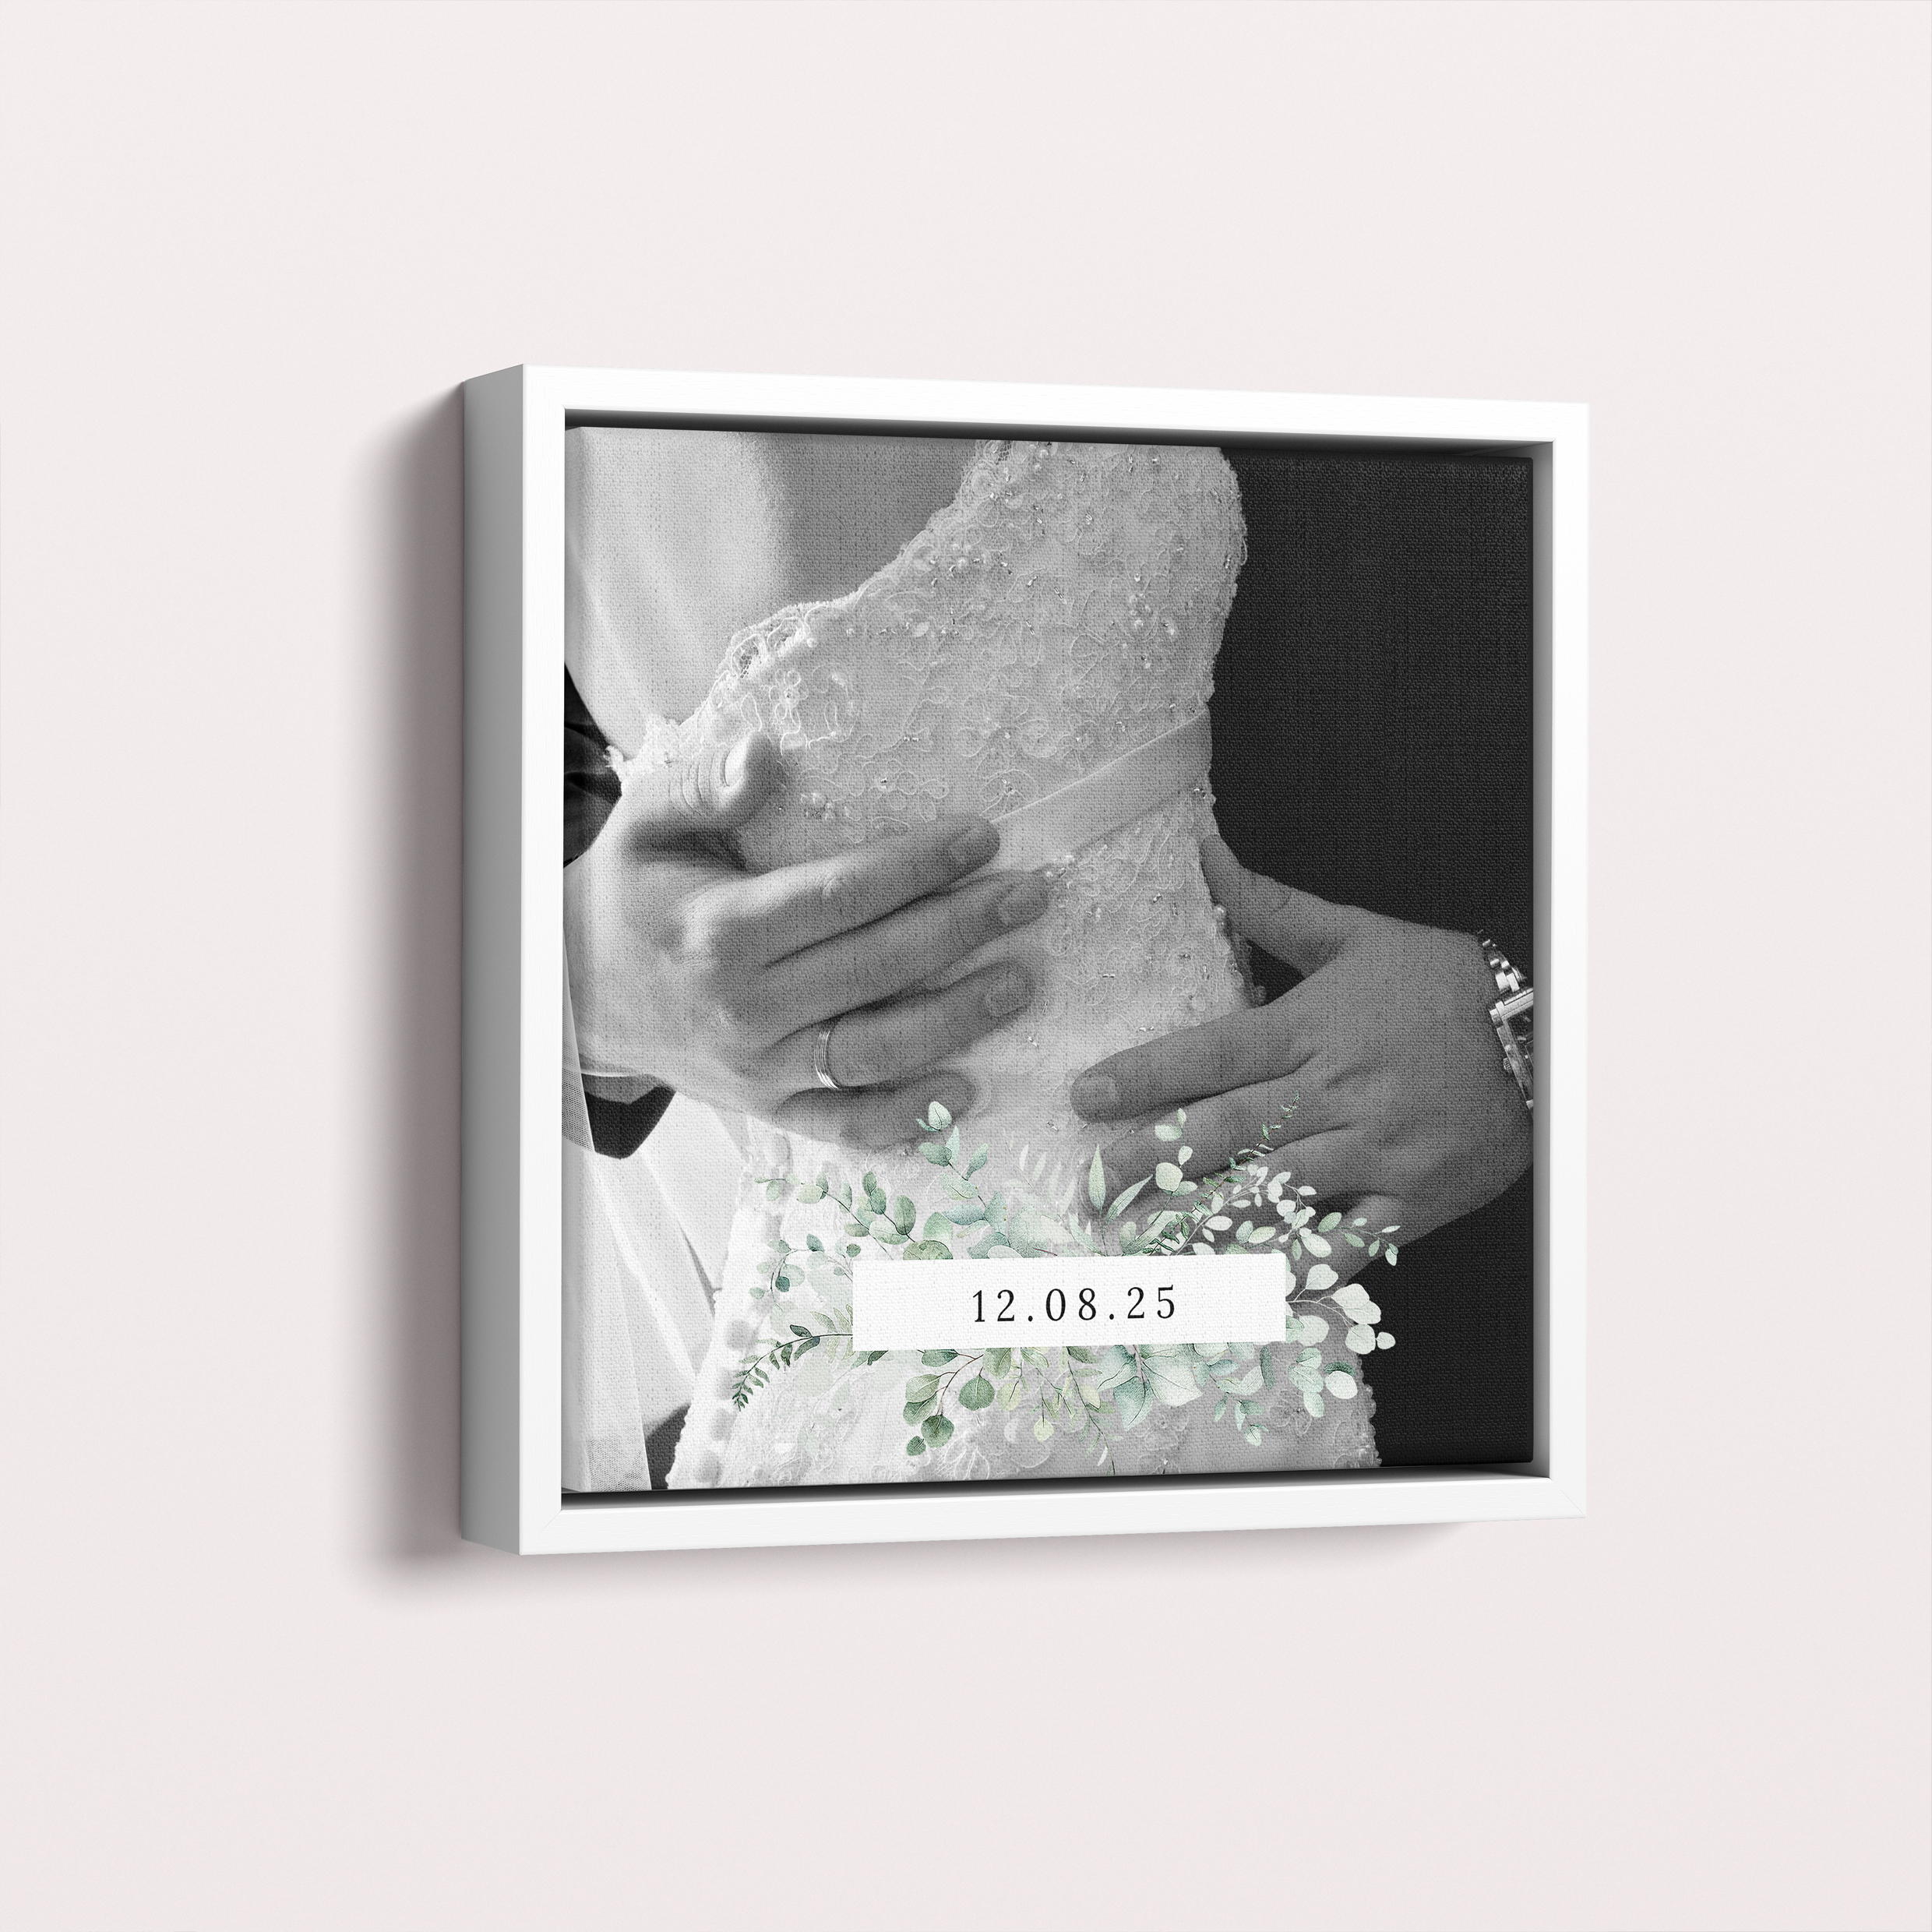 Sealed with Love Framed Photo Canvas - Bring Moments to Life with a Unique Presentation